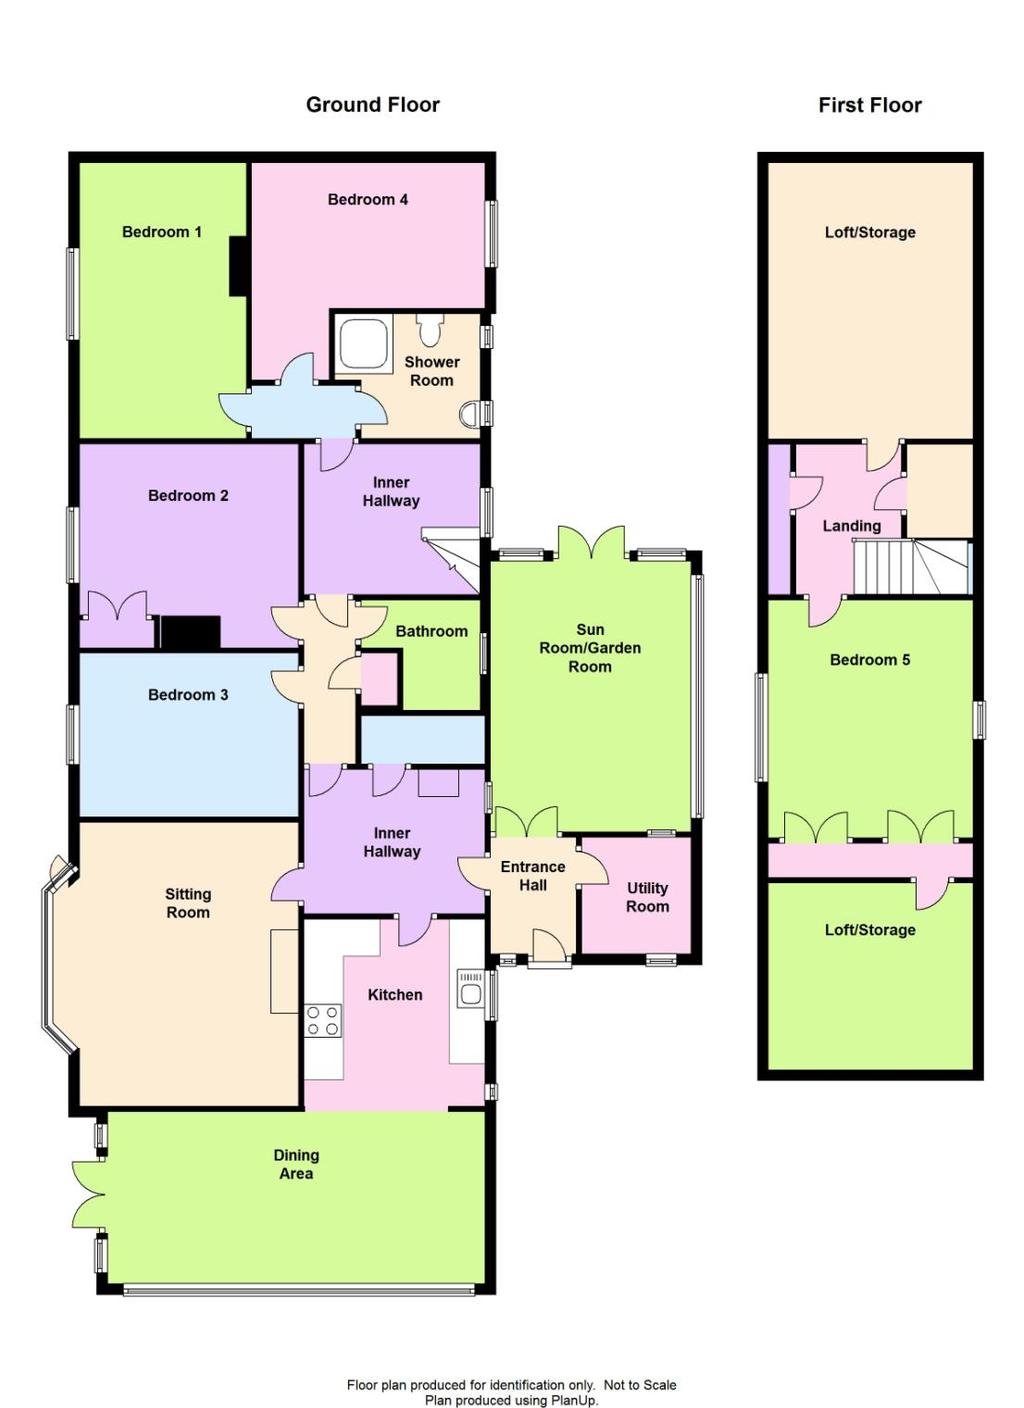 These particulars are not an offer or contract or part of one. Floor plans are provided for guidance as to the layout of the property only.